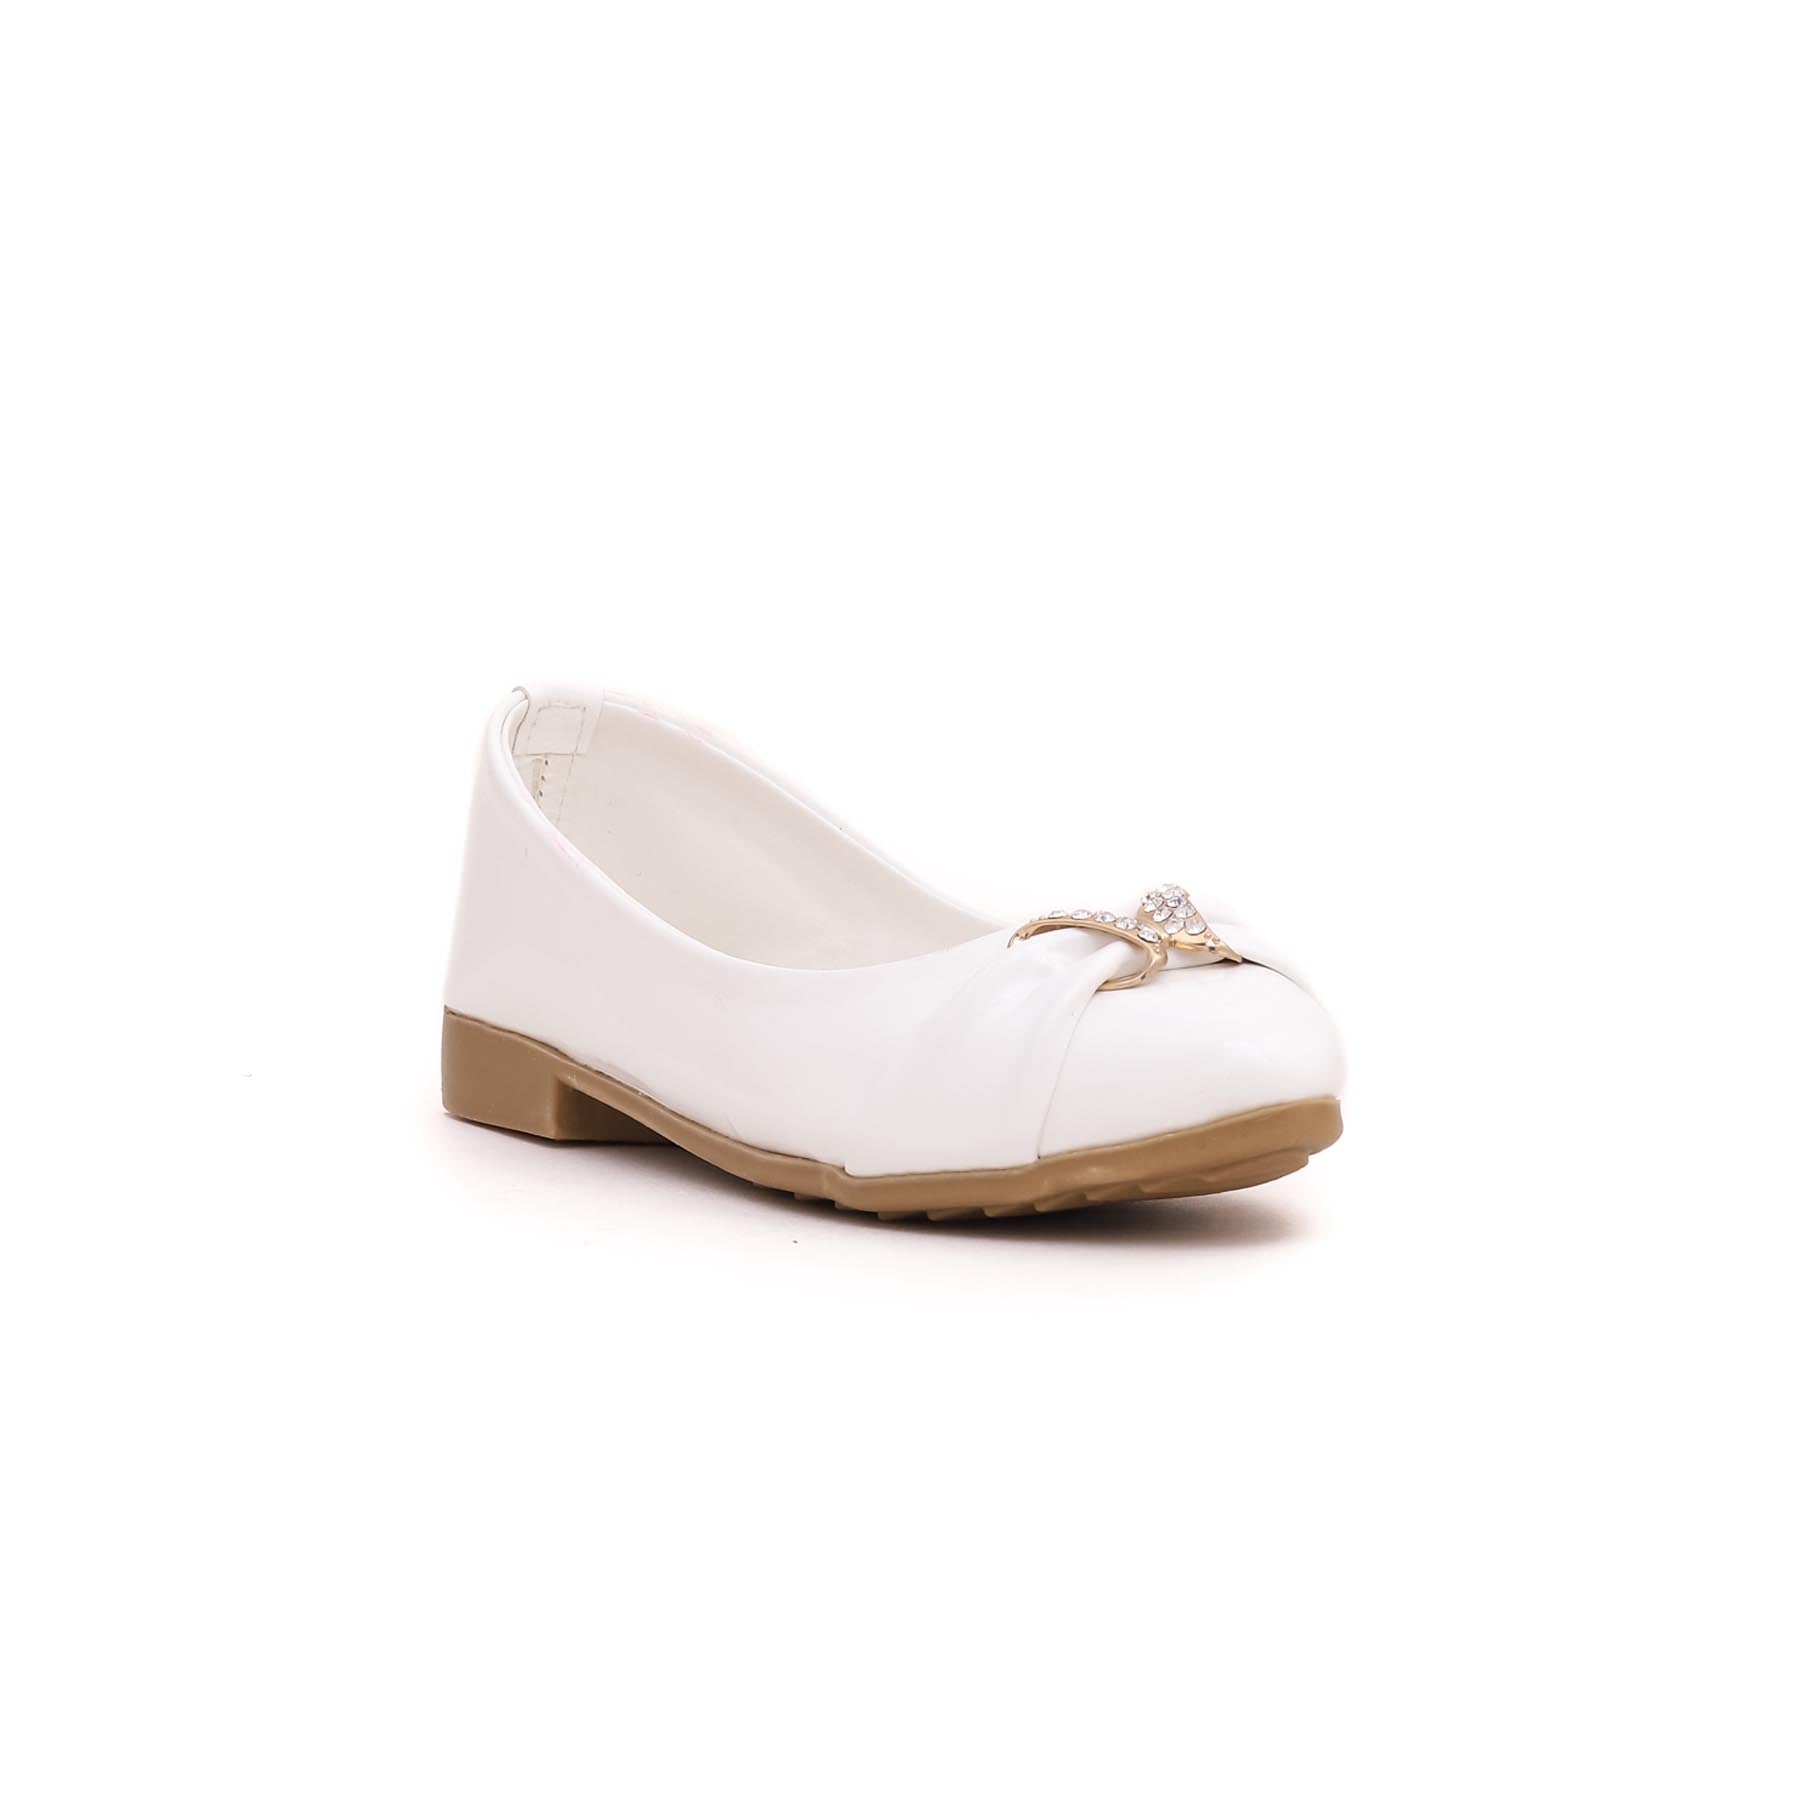 Girls White Casual Pumps KD0768